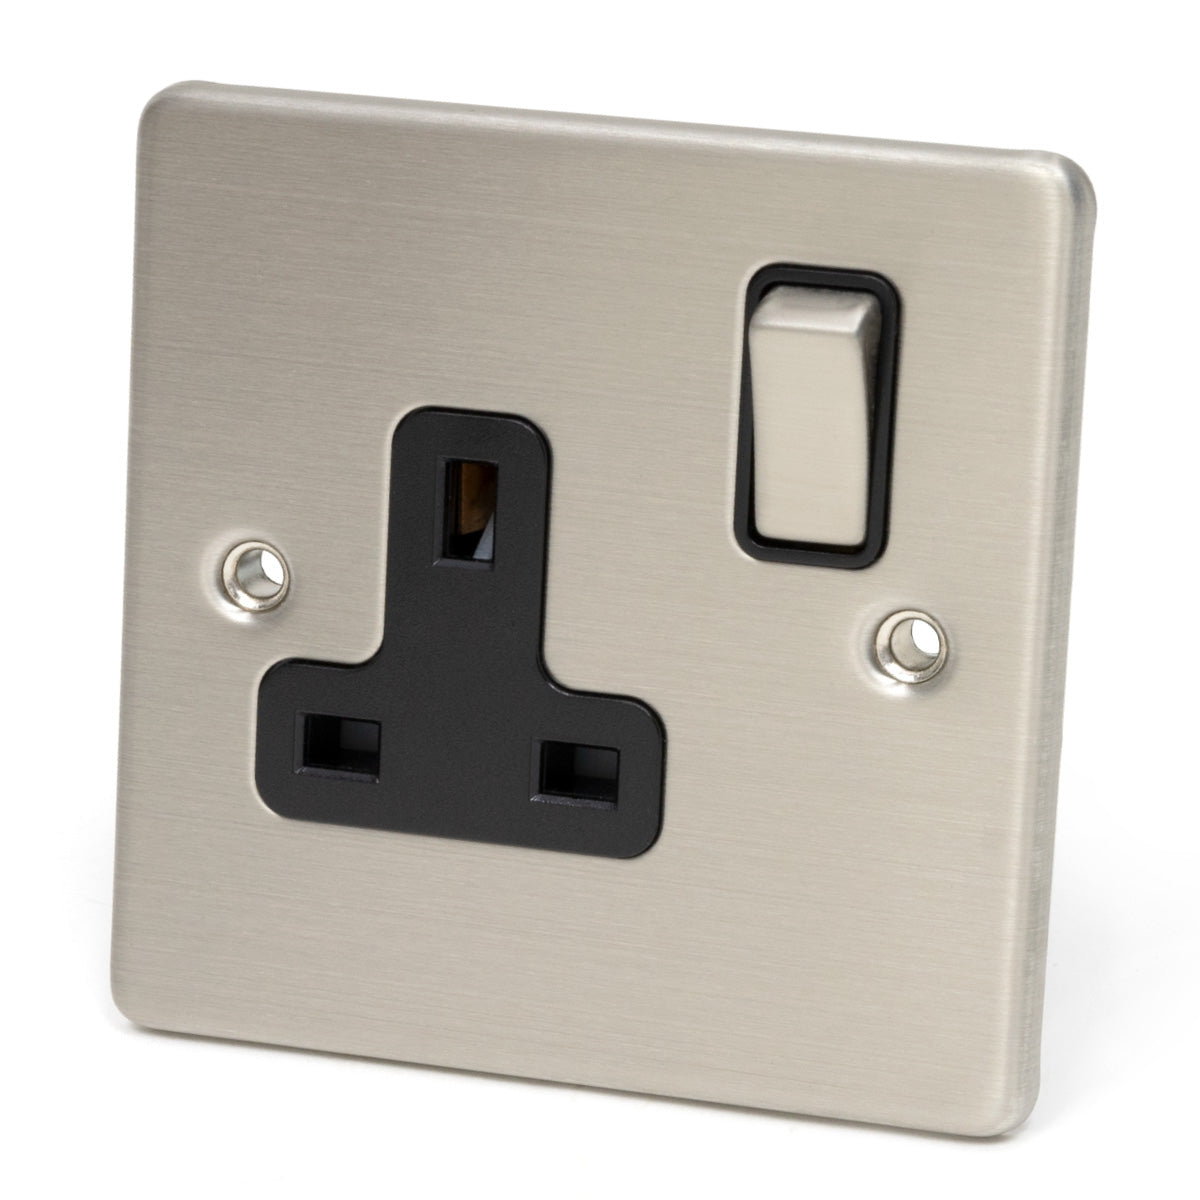 Stainless Steel Single Switched Socket